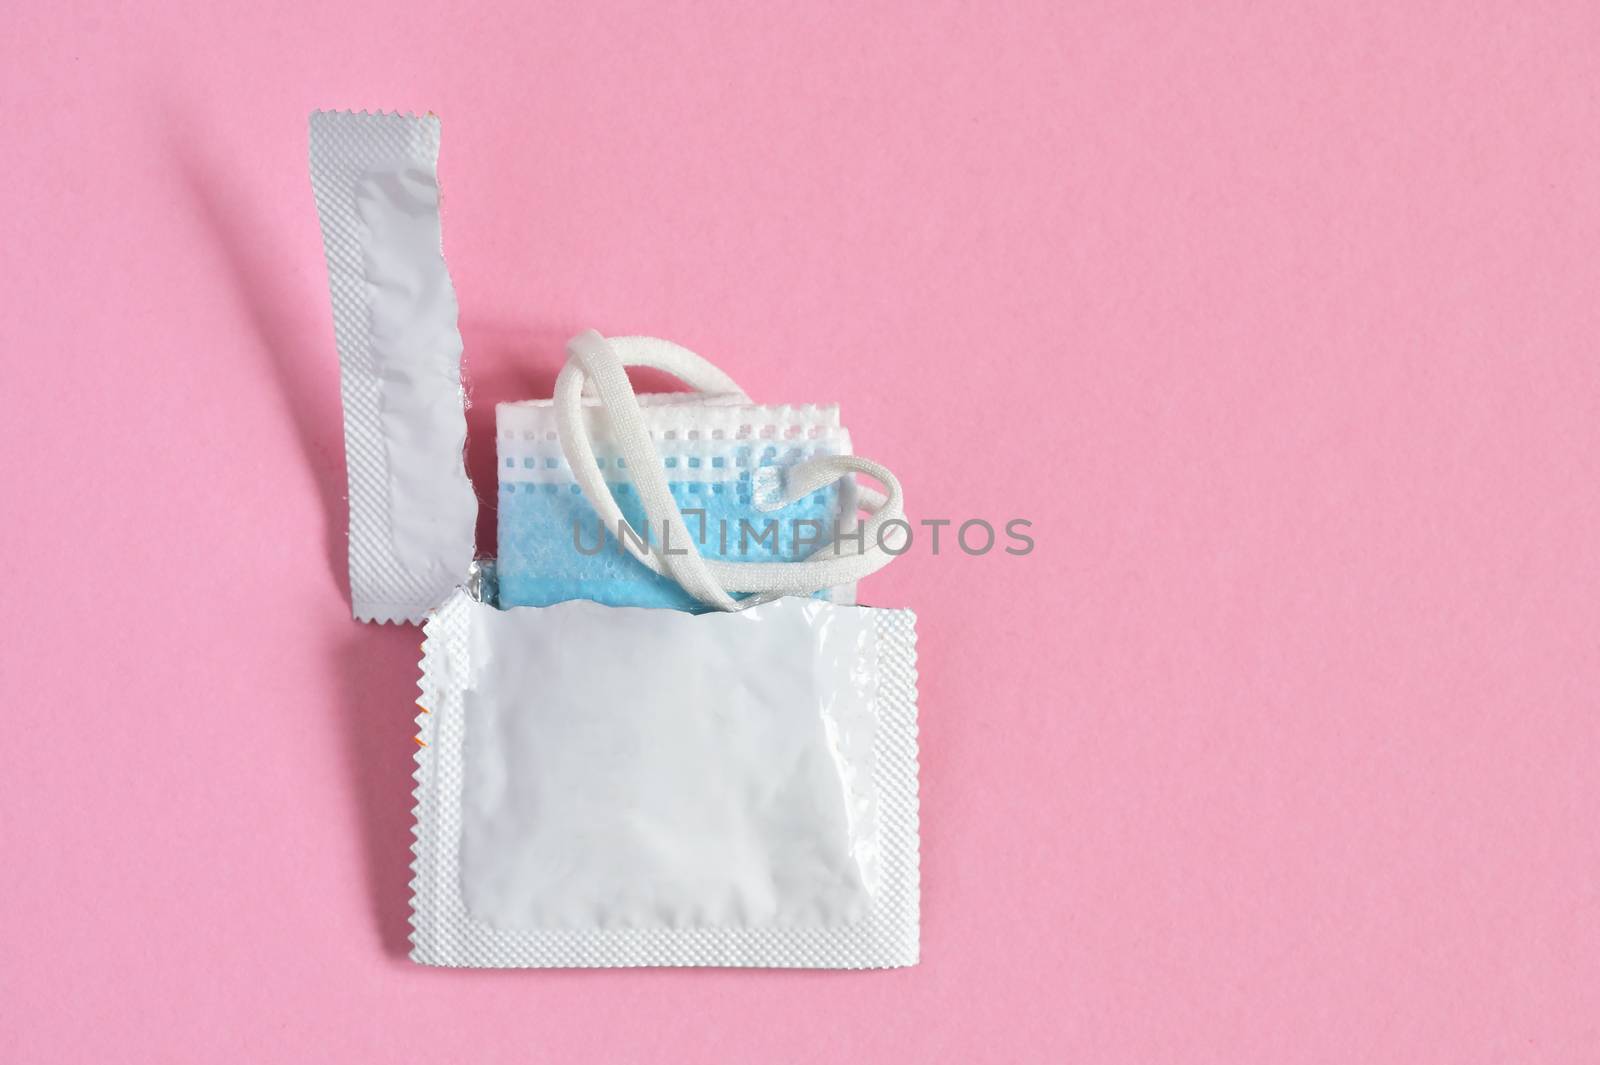  Medical Masks and Condom Package Isolated  by mady70